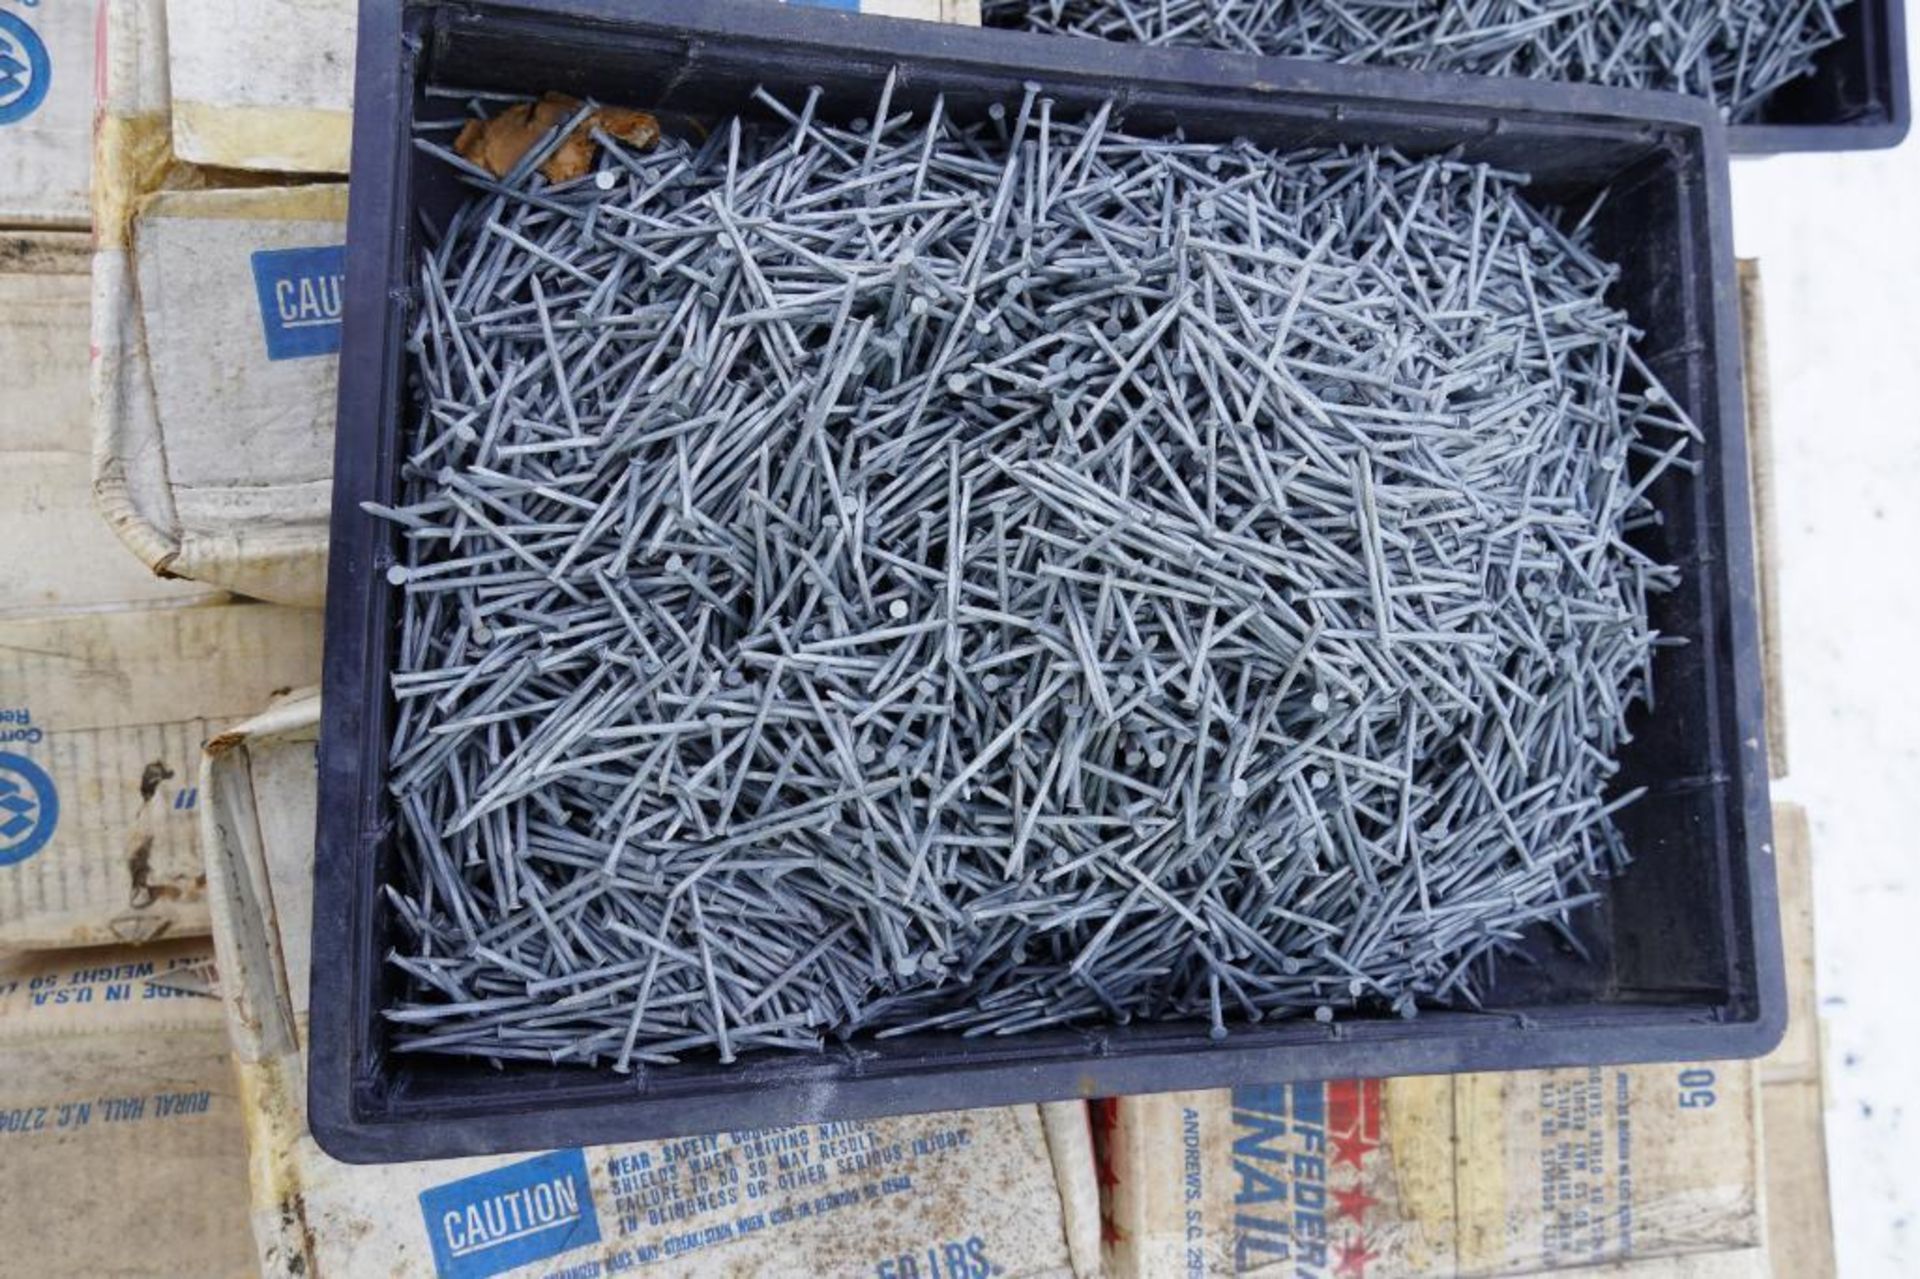 19, 50# Boxes of 2 1/4" Stiff Stock Spiral Pallet Nails, 11 Guage - Image 3 of 5